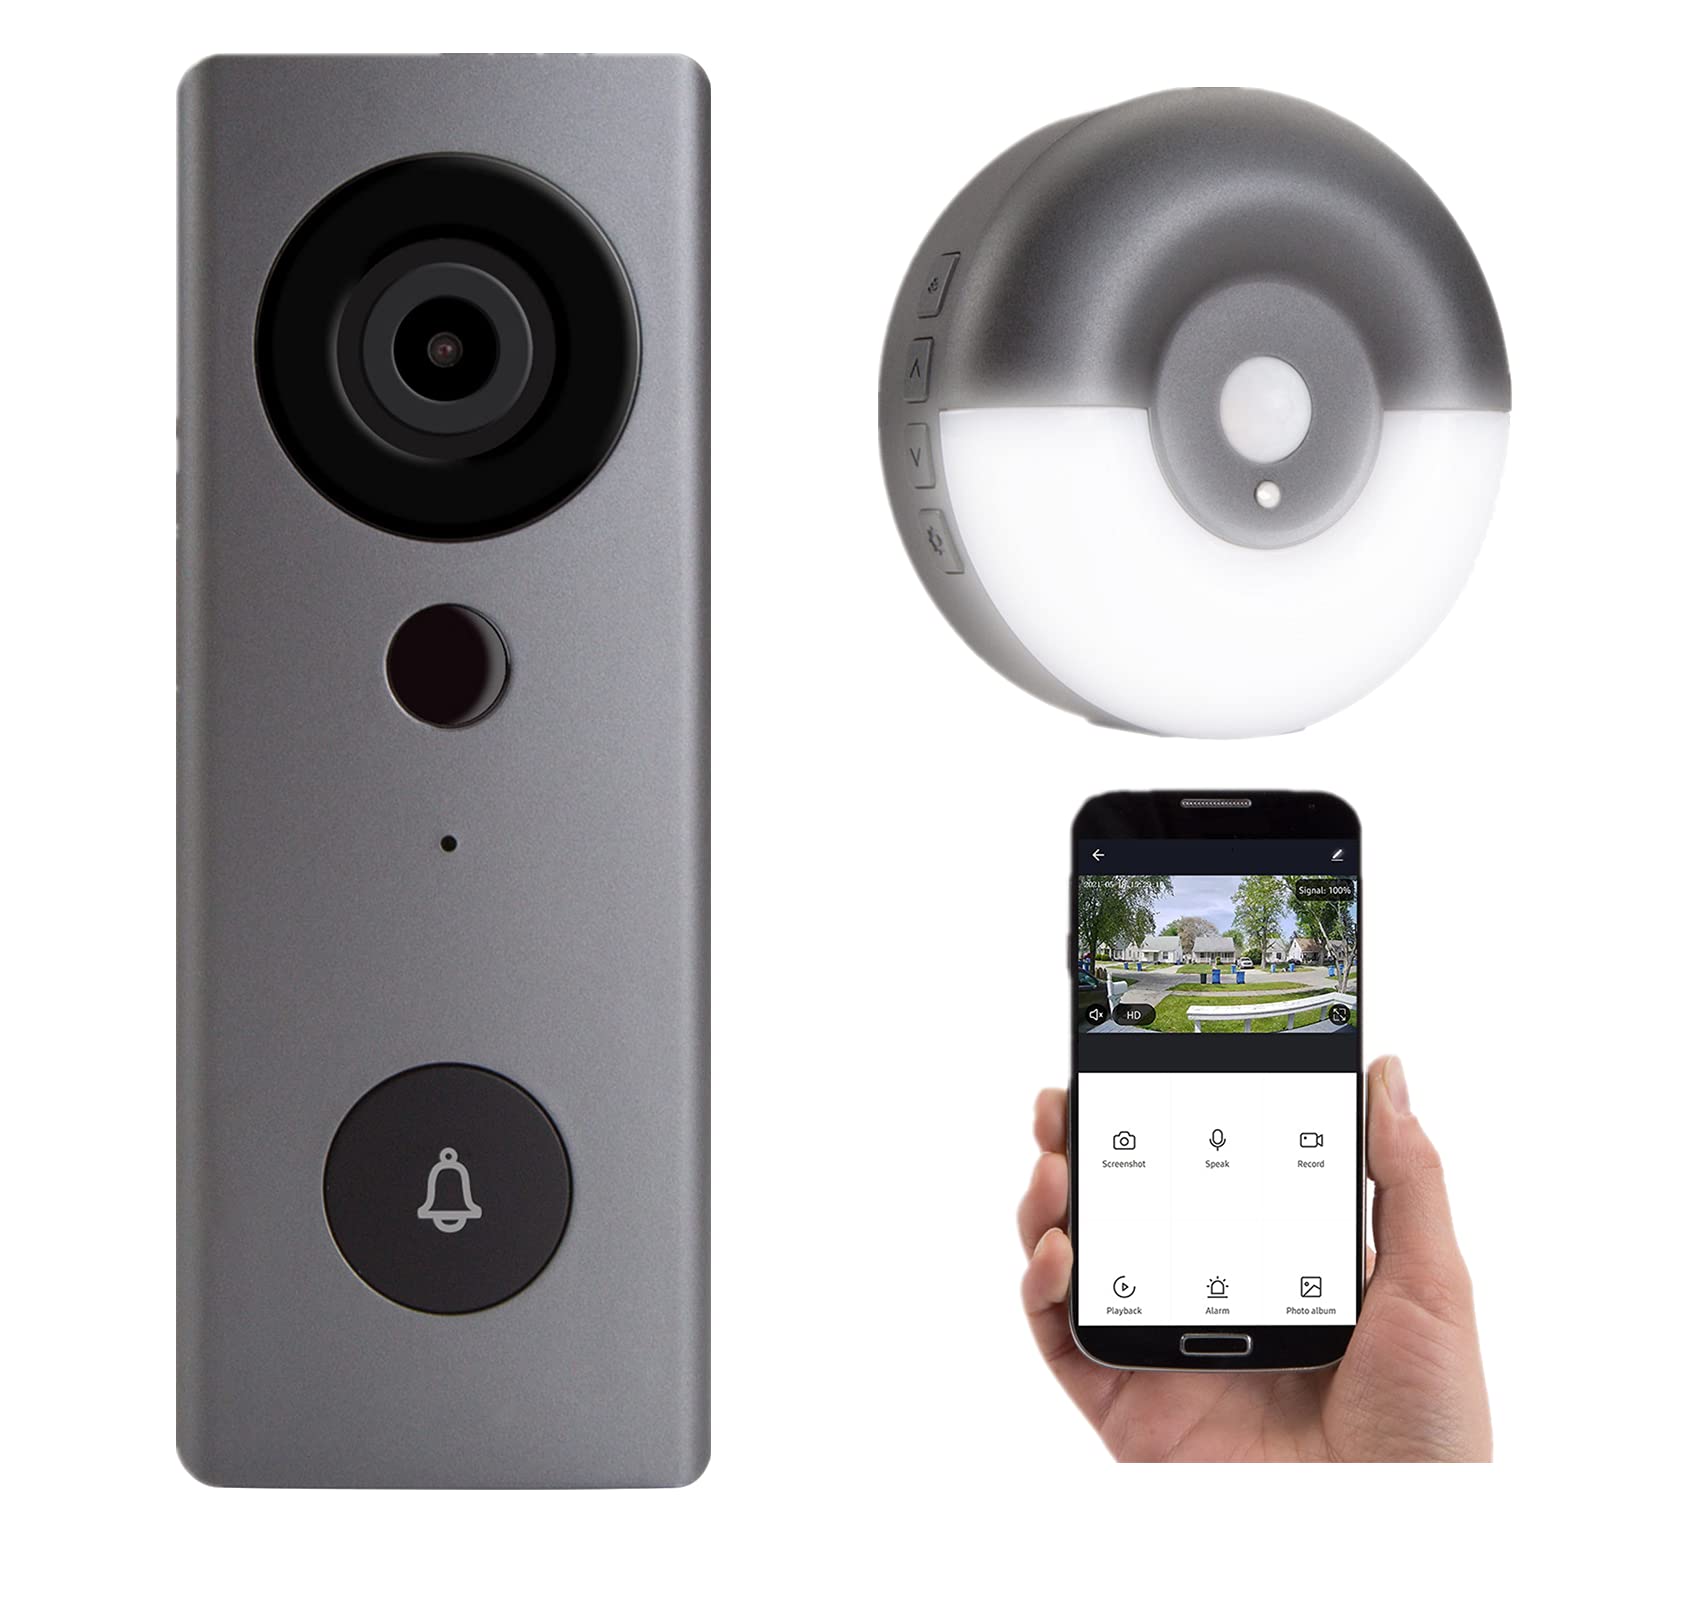 Which Video Doorbell Works With Existing Chime